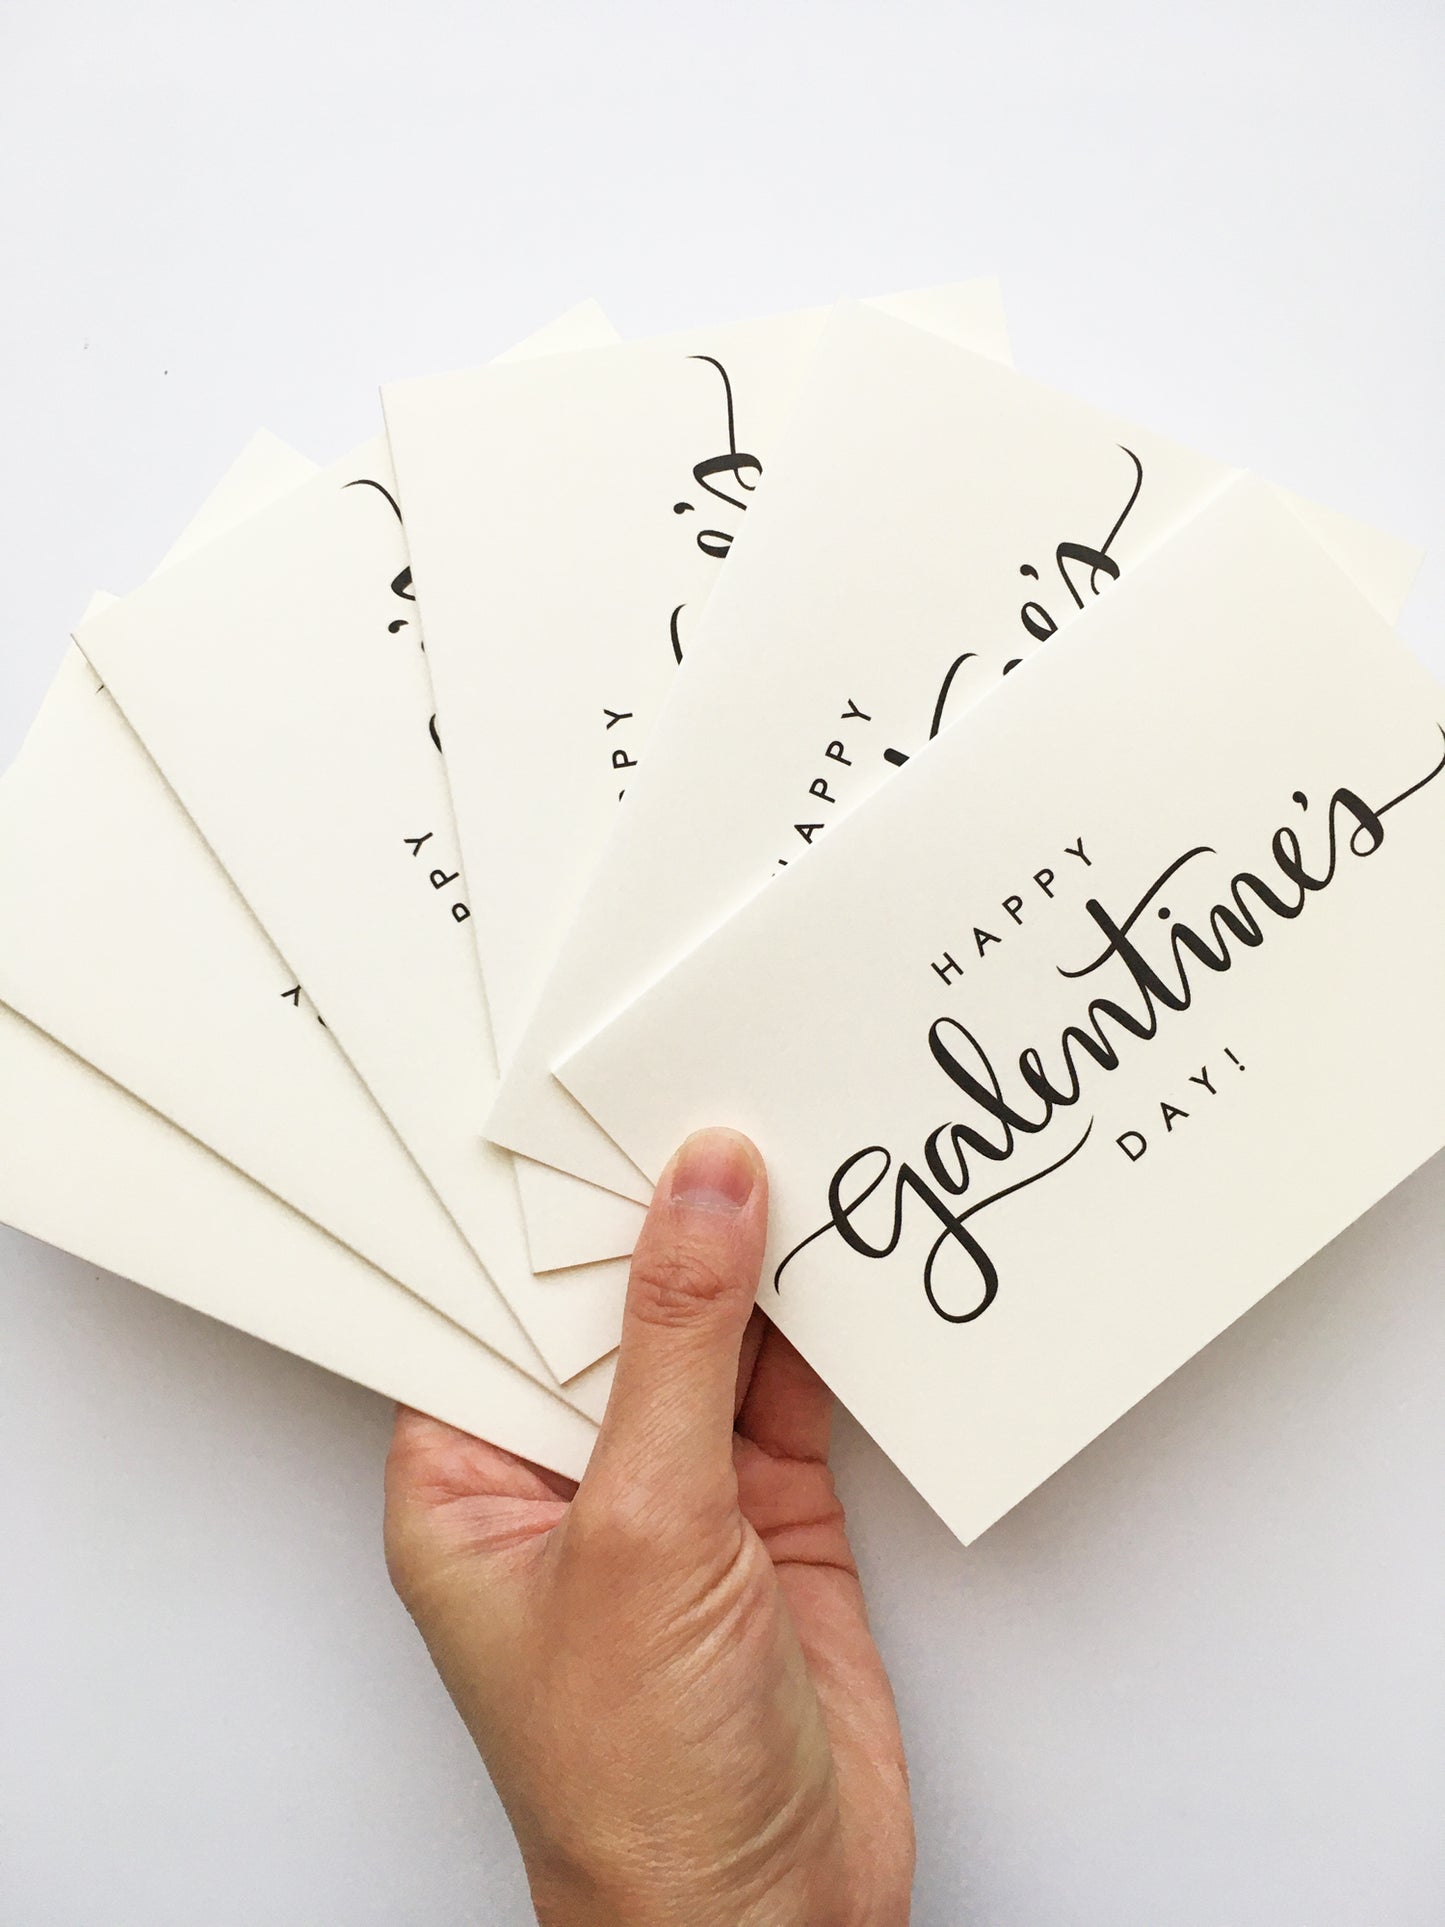 SECONDS SALE! Set of 6 - A1 Happy Galentine's Day Card